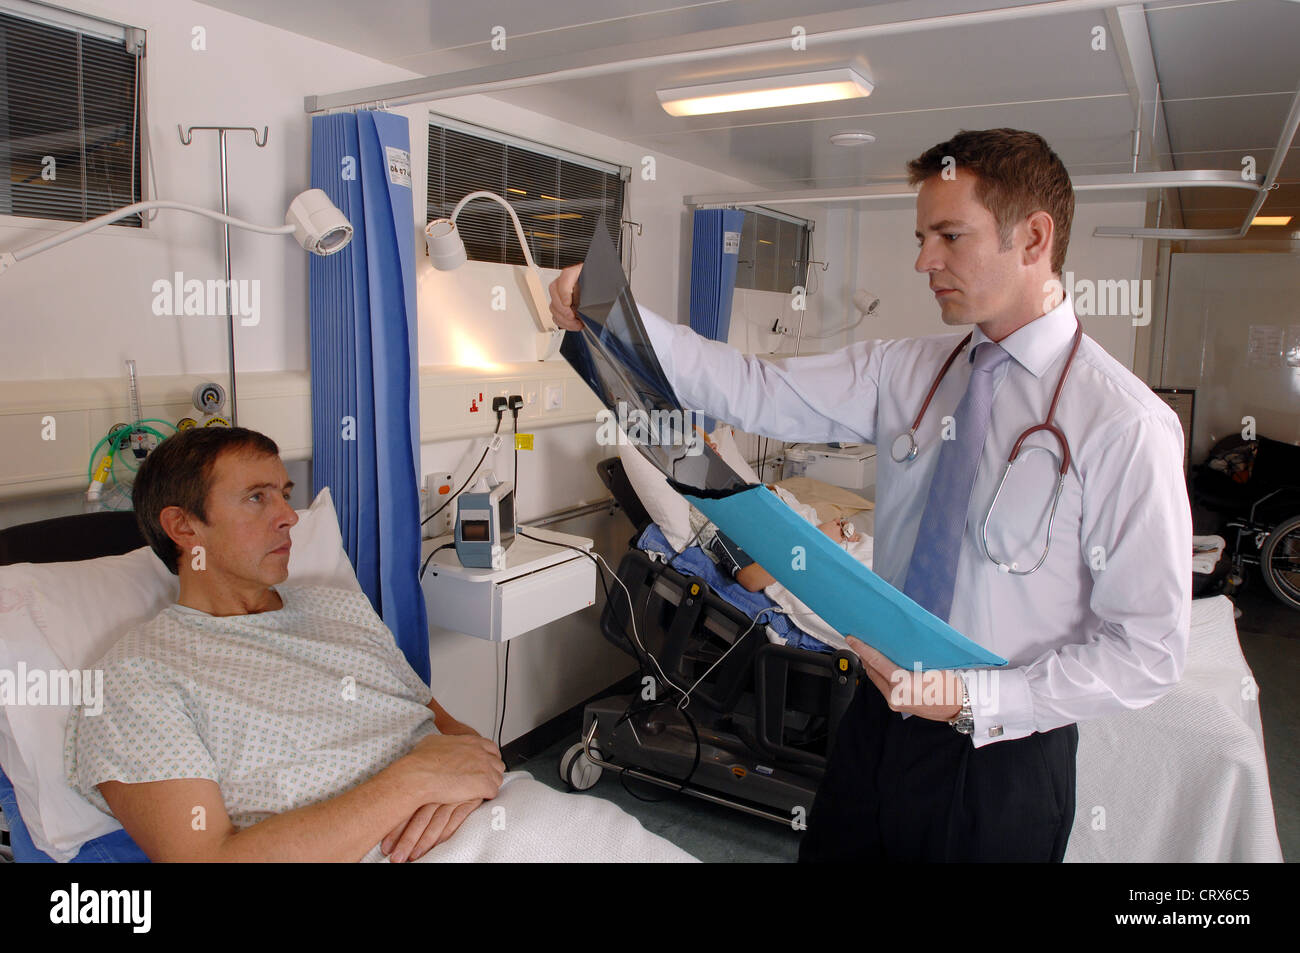 A doctor on his ward round reviews an x-ray during a hospital bedside consultation with his male patient. Stock Photo